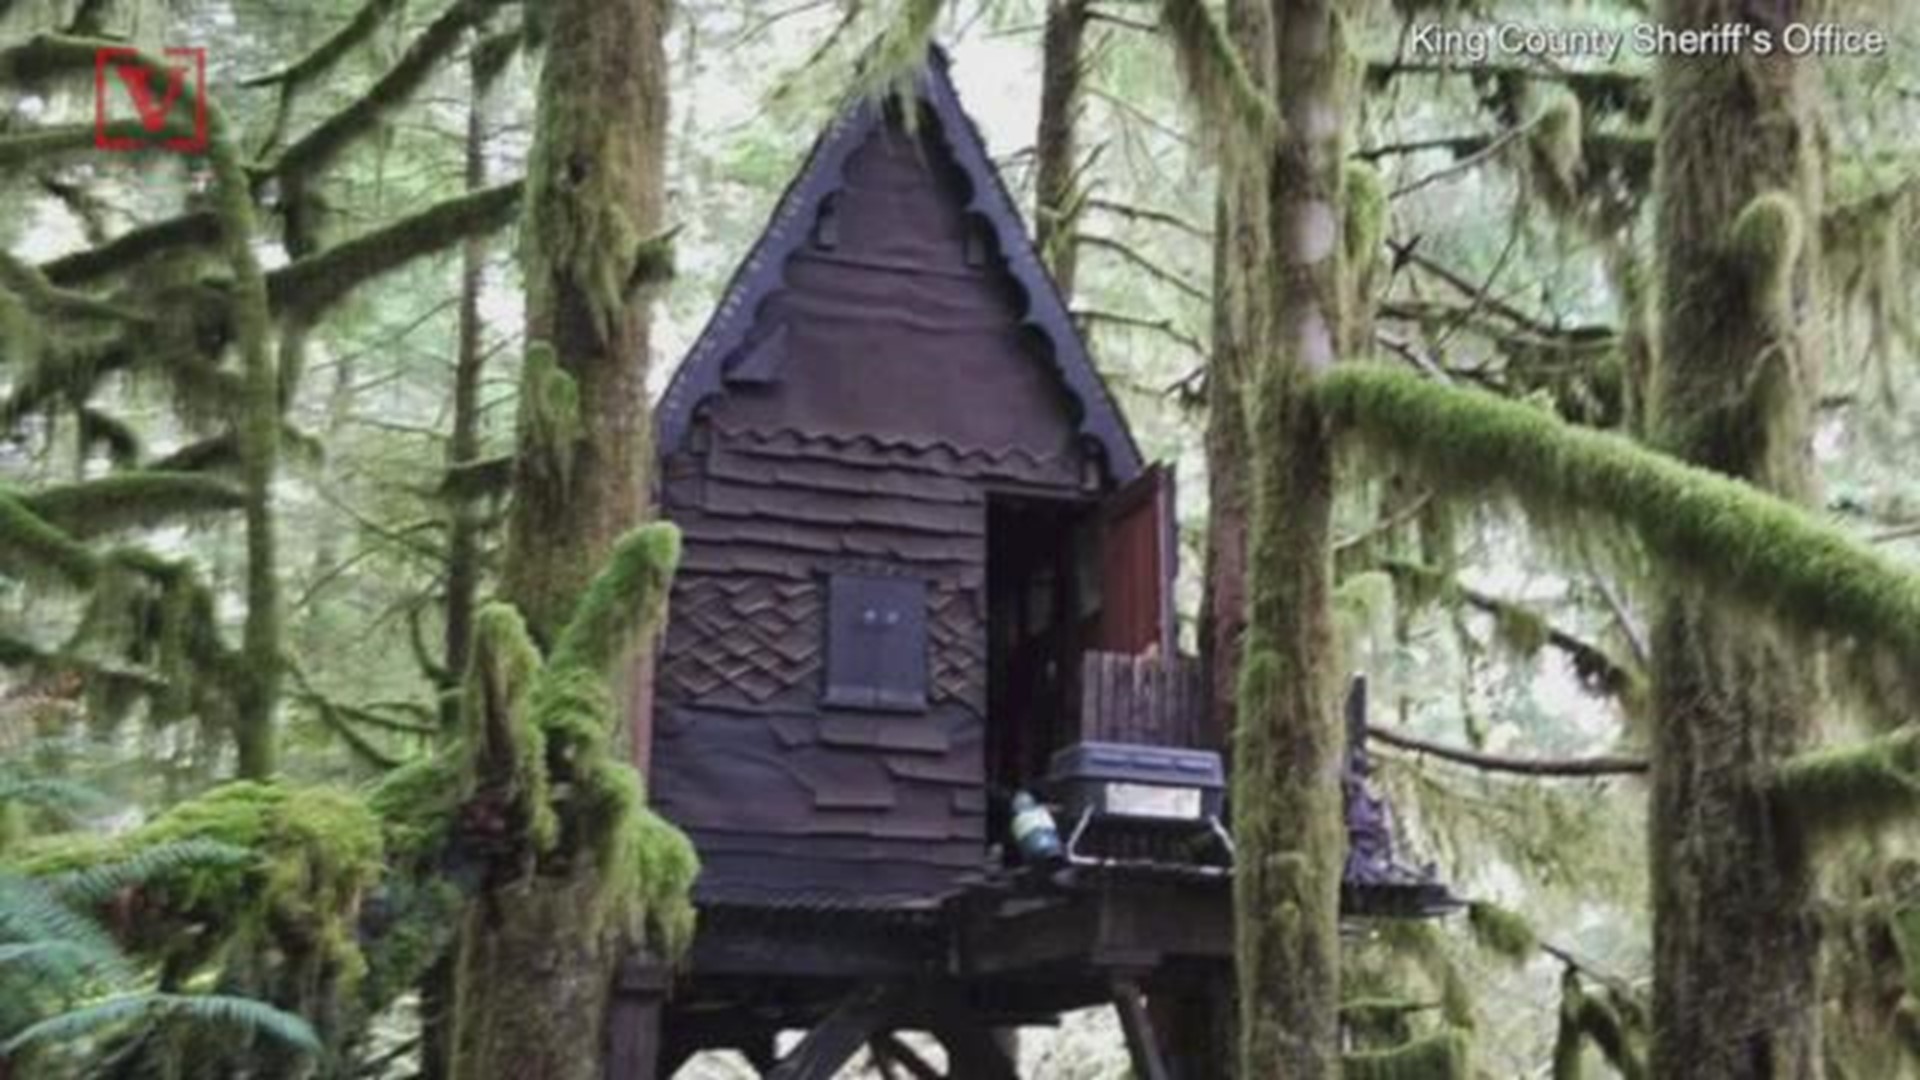 Inside this treehouse that looks like something out of a fairy tale, federal officials found a stash of child pornography.